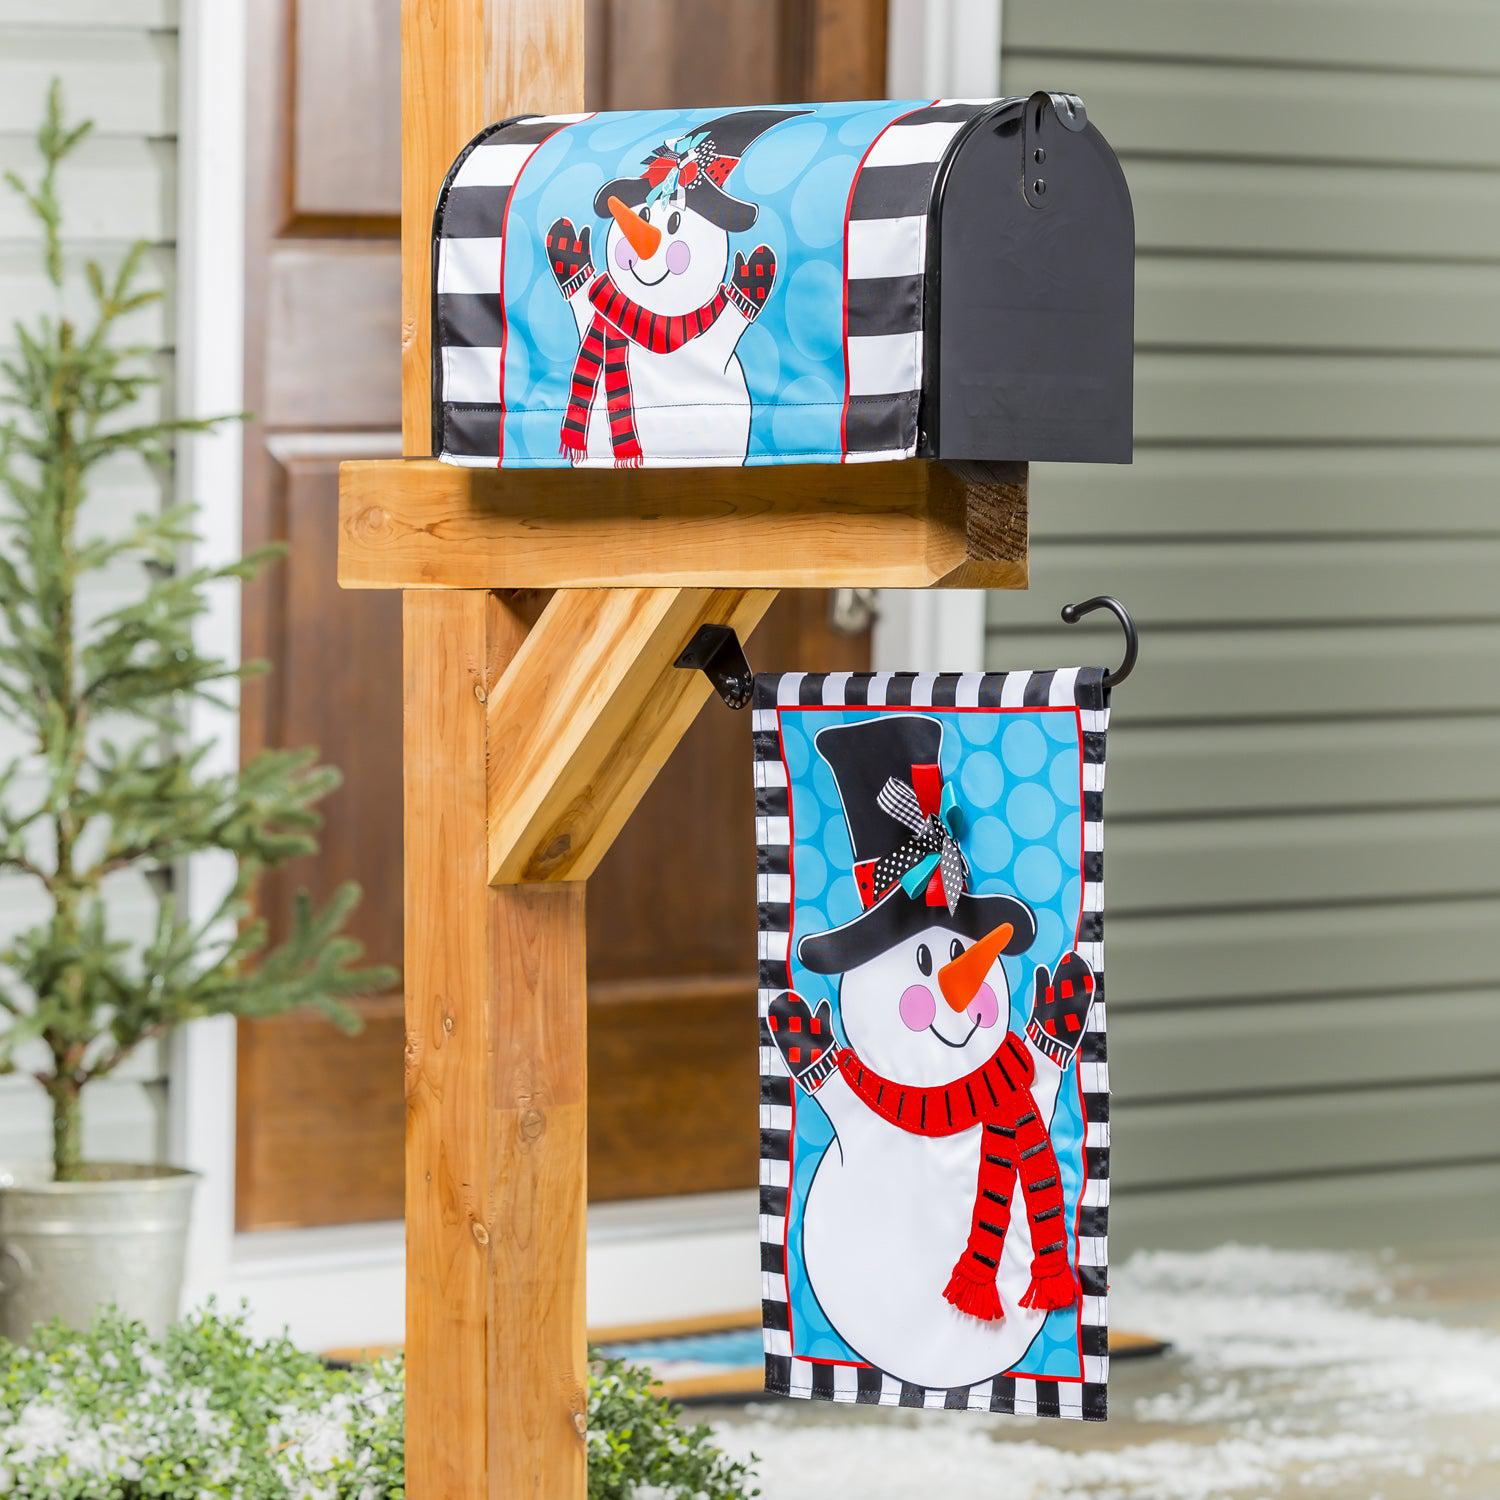 The Patterned Snowman garden flag features a happy snowman over a blue circle print background with a black and white checked border. 